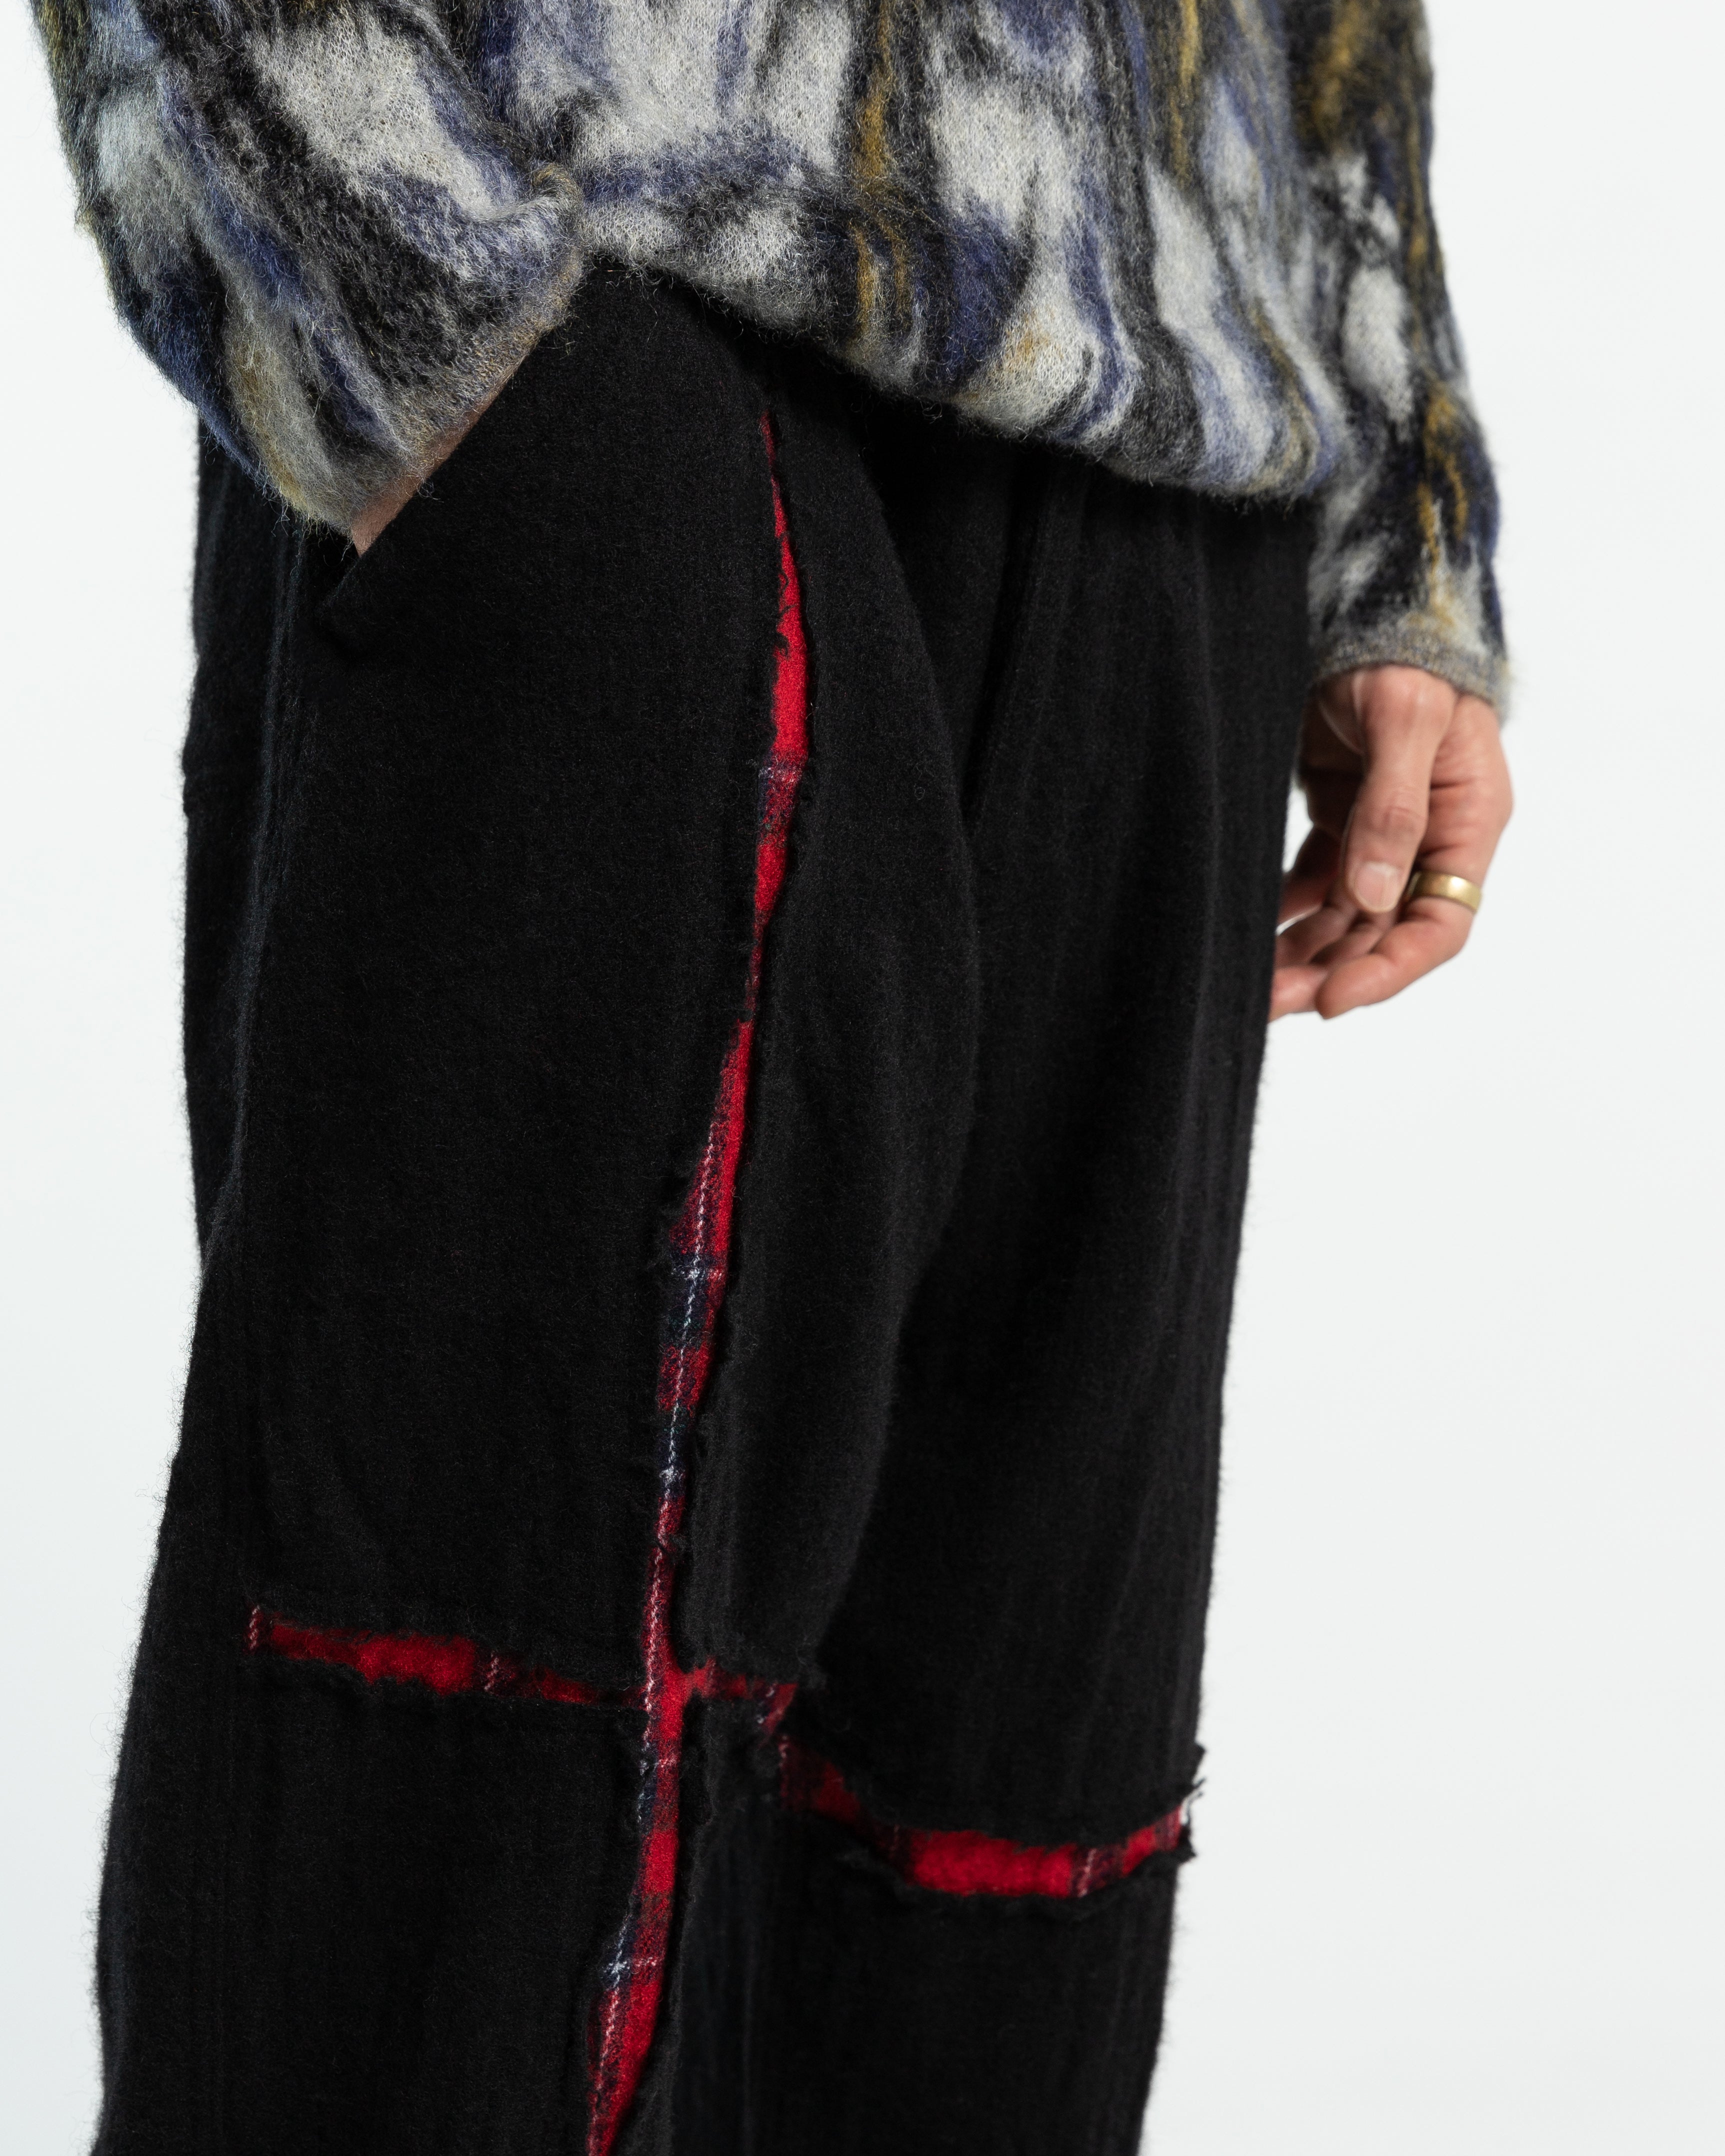 Wool Panel Trouser in Black and Red